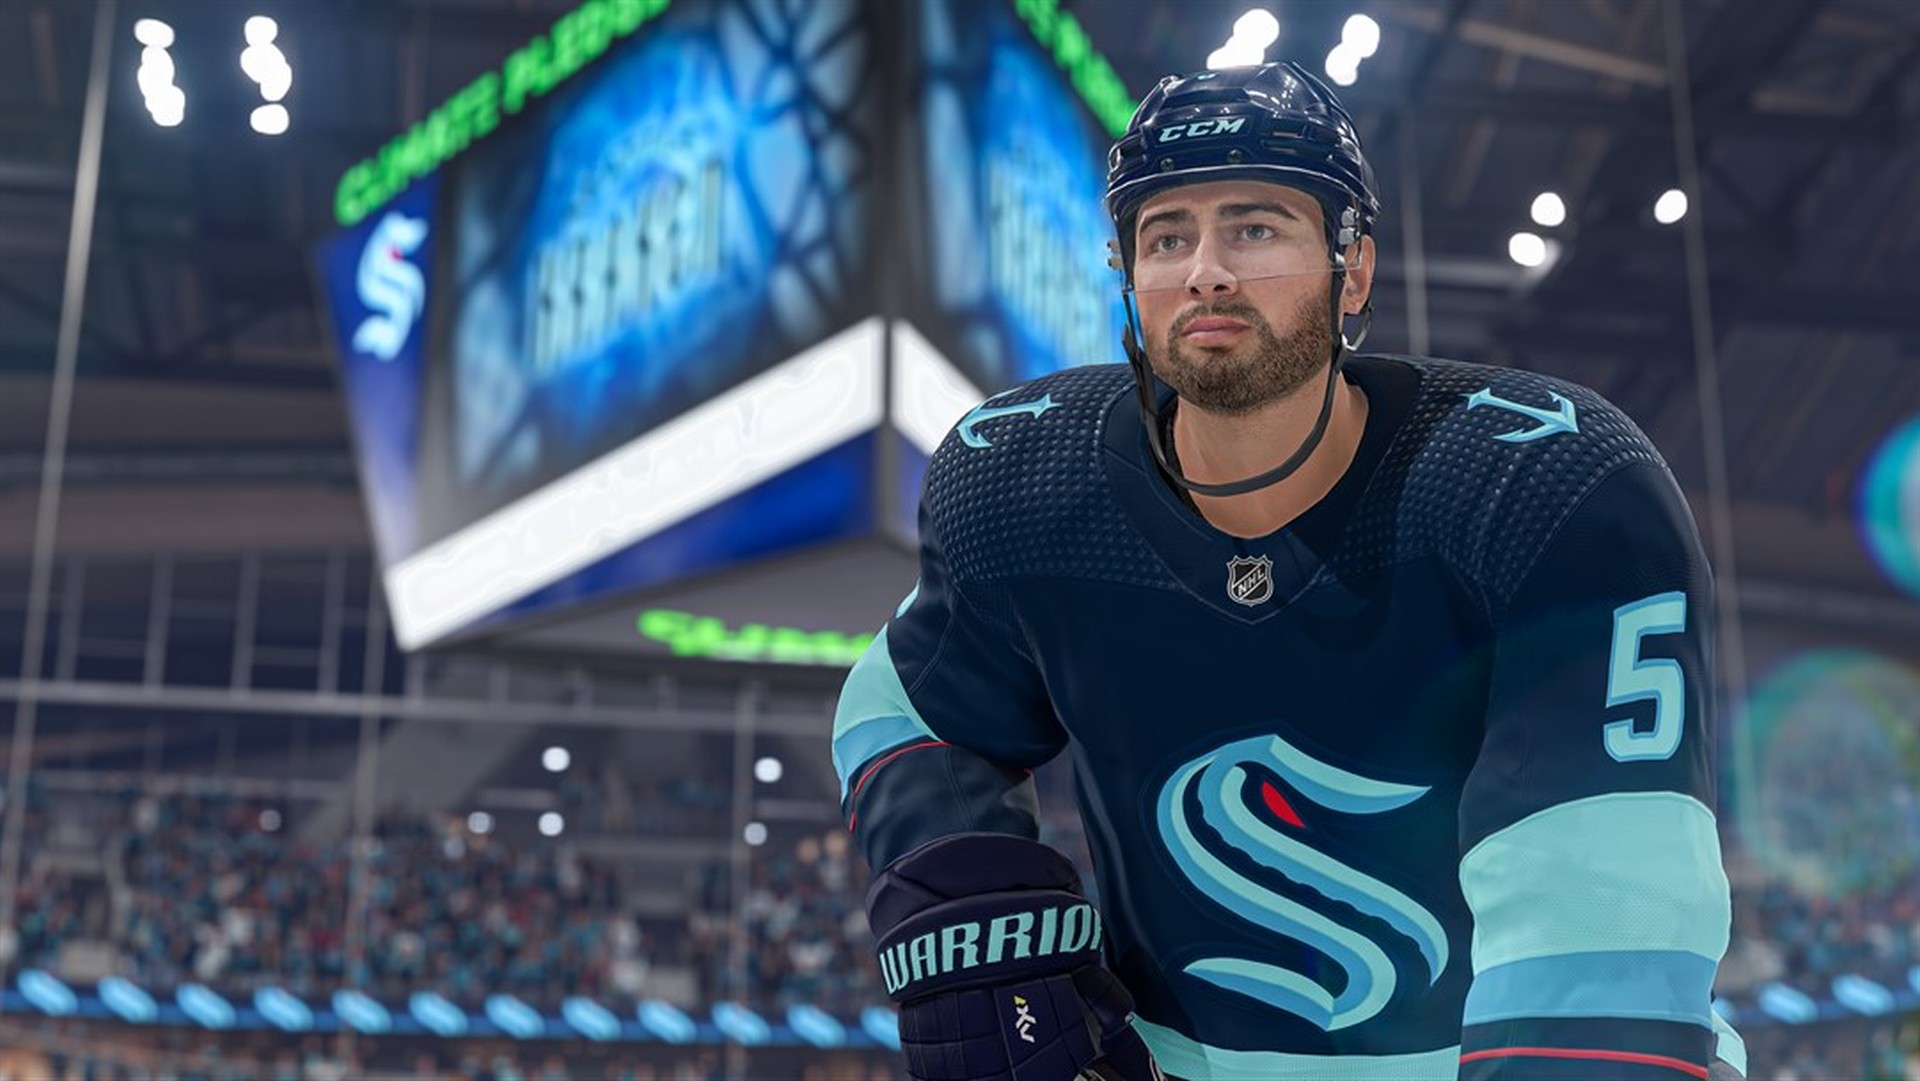 NHL 22 – October 15 – Optimized for Xbox Series X|S